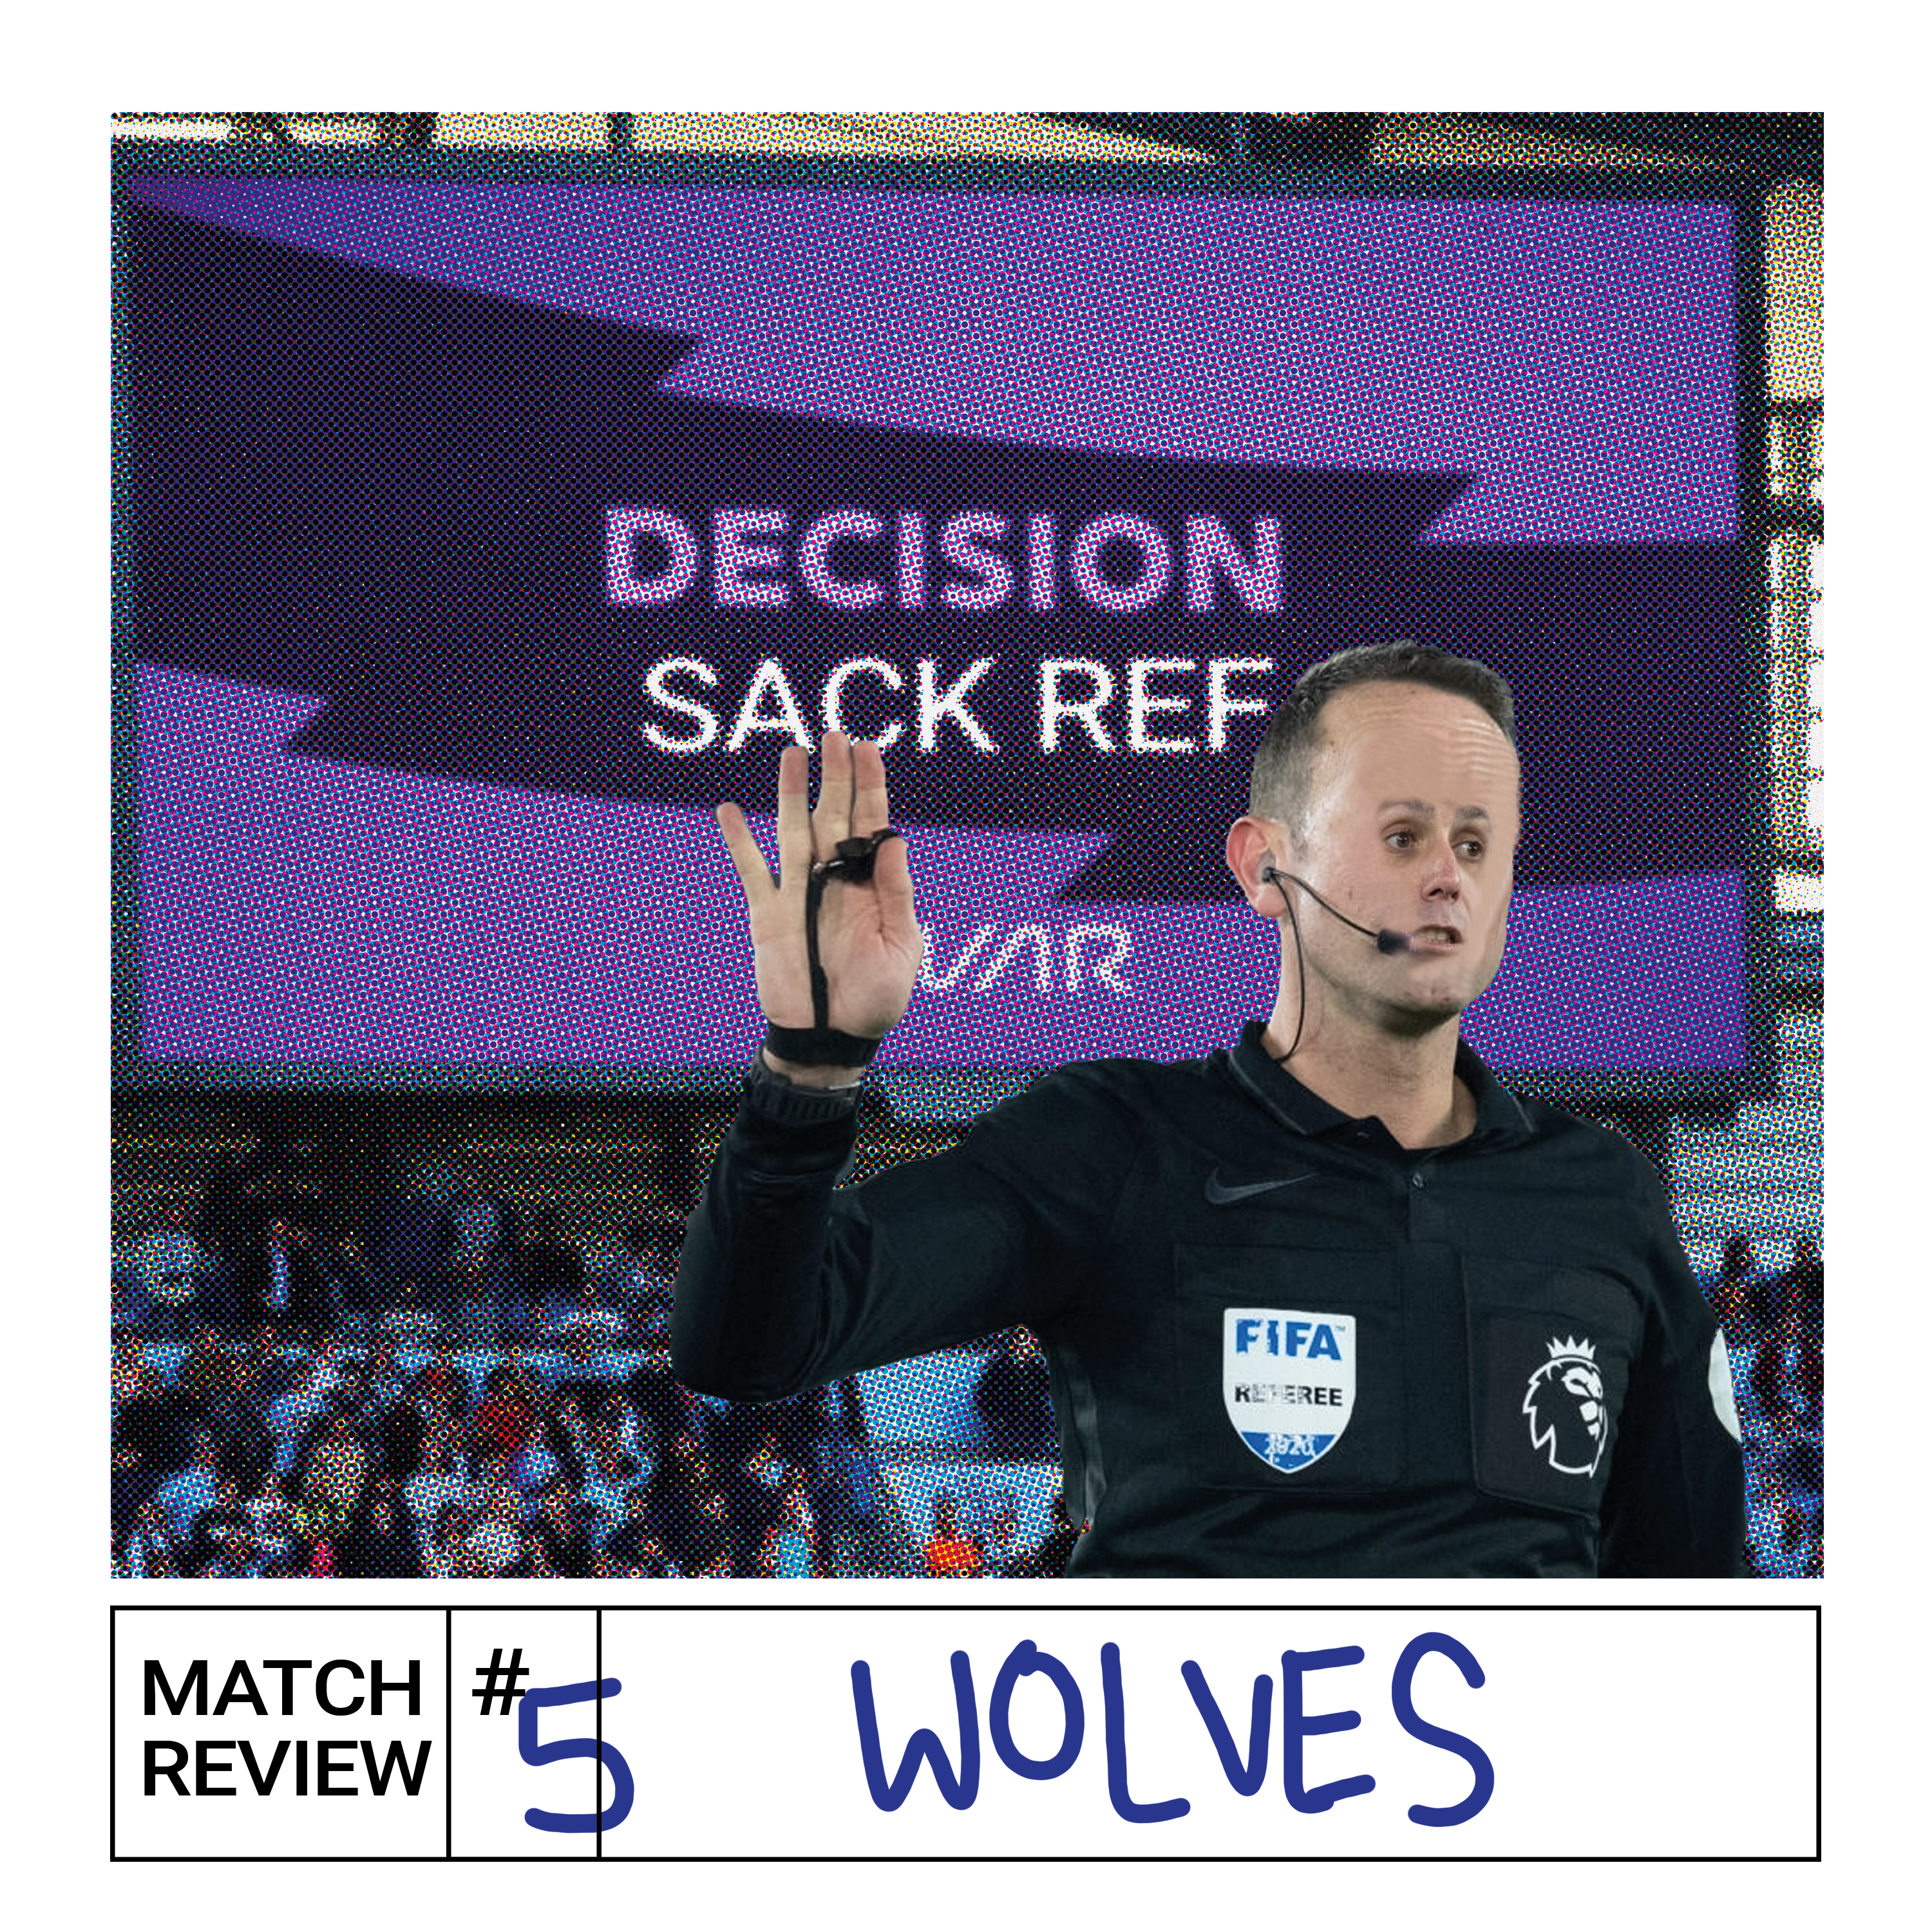 Leeds United 0 Wolves 1 | Match Review | LUFC Podcast